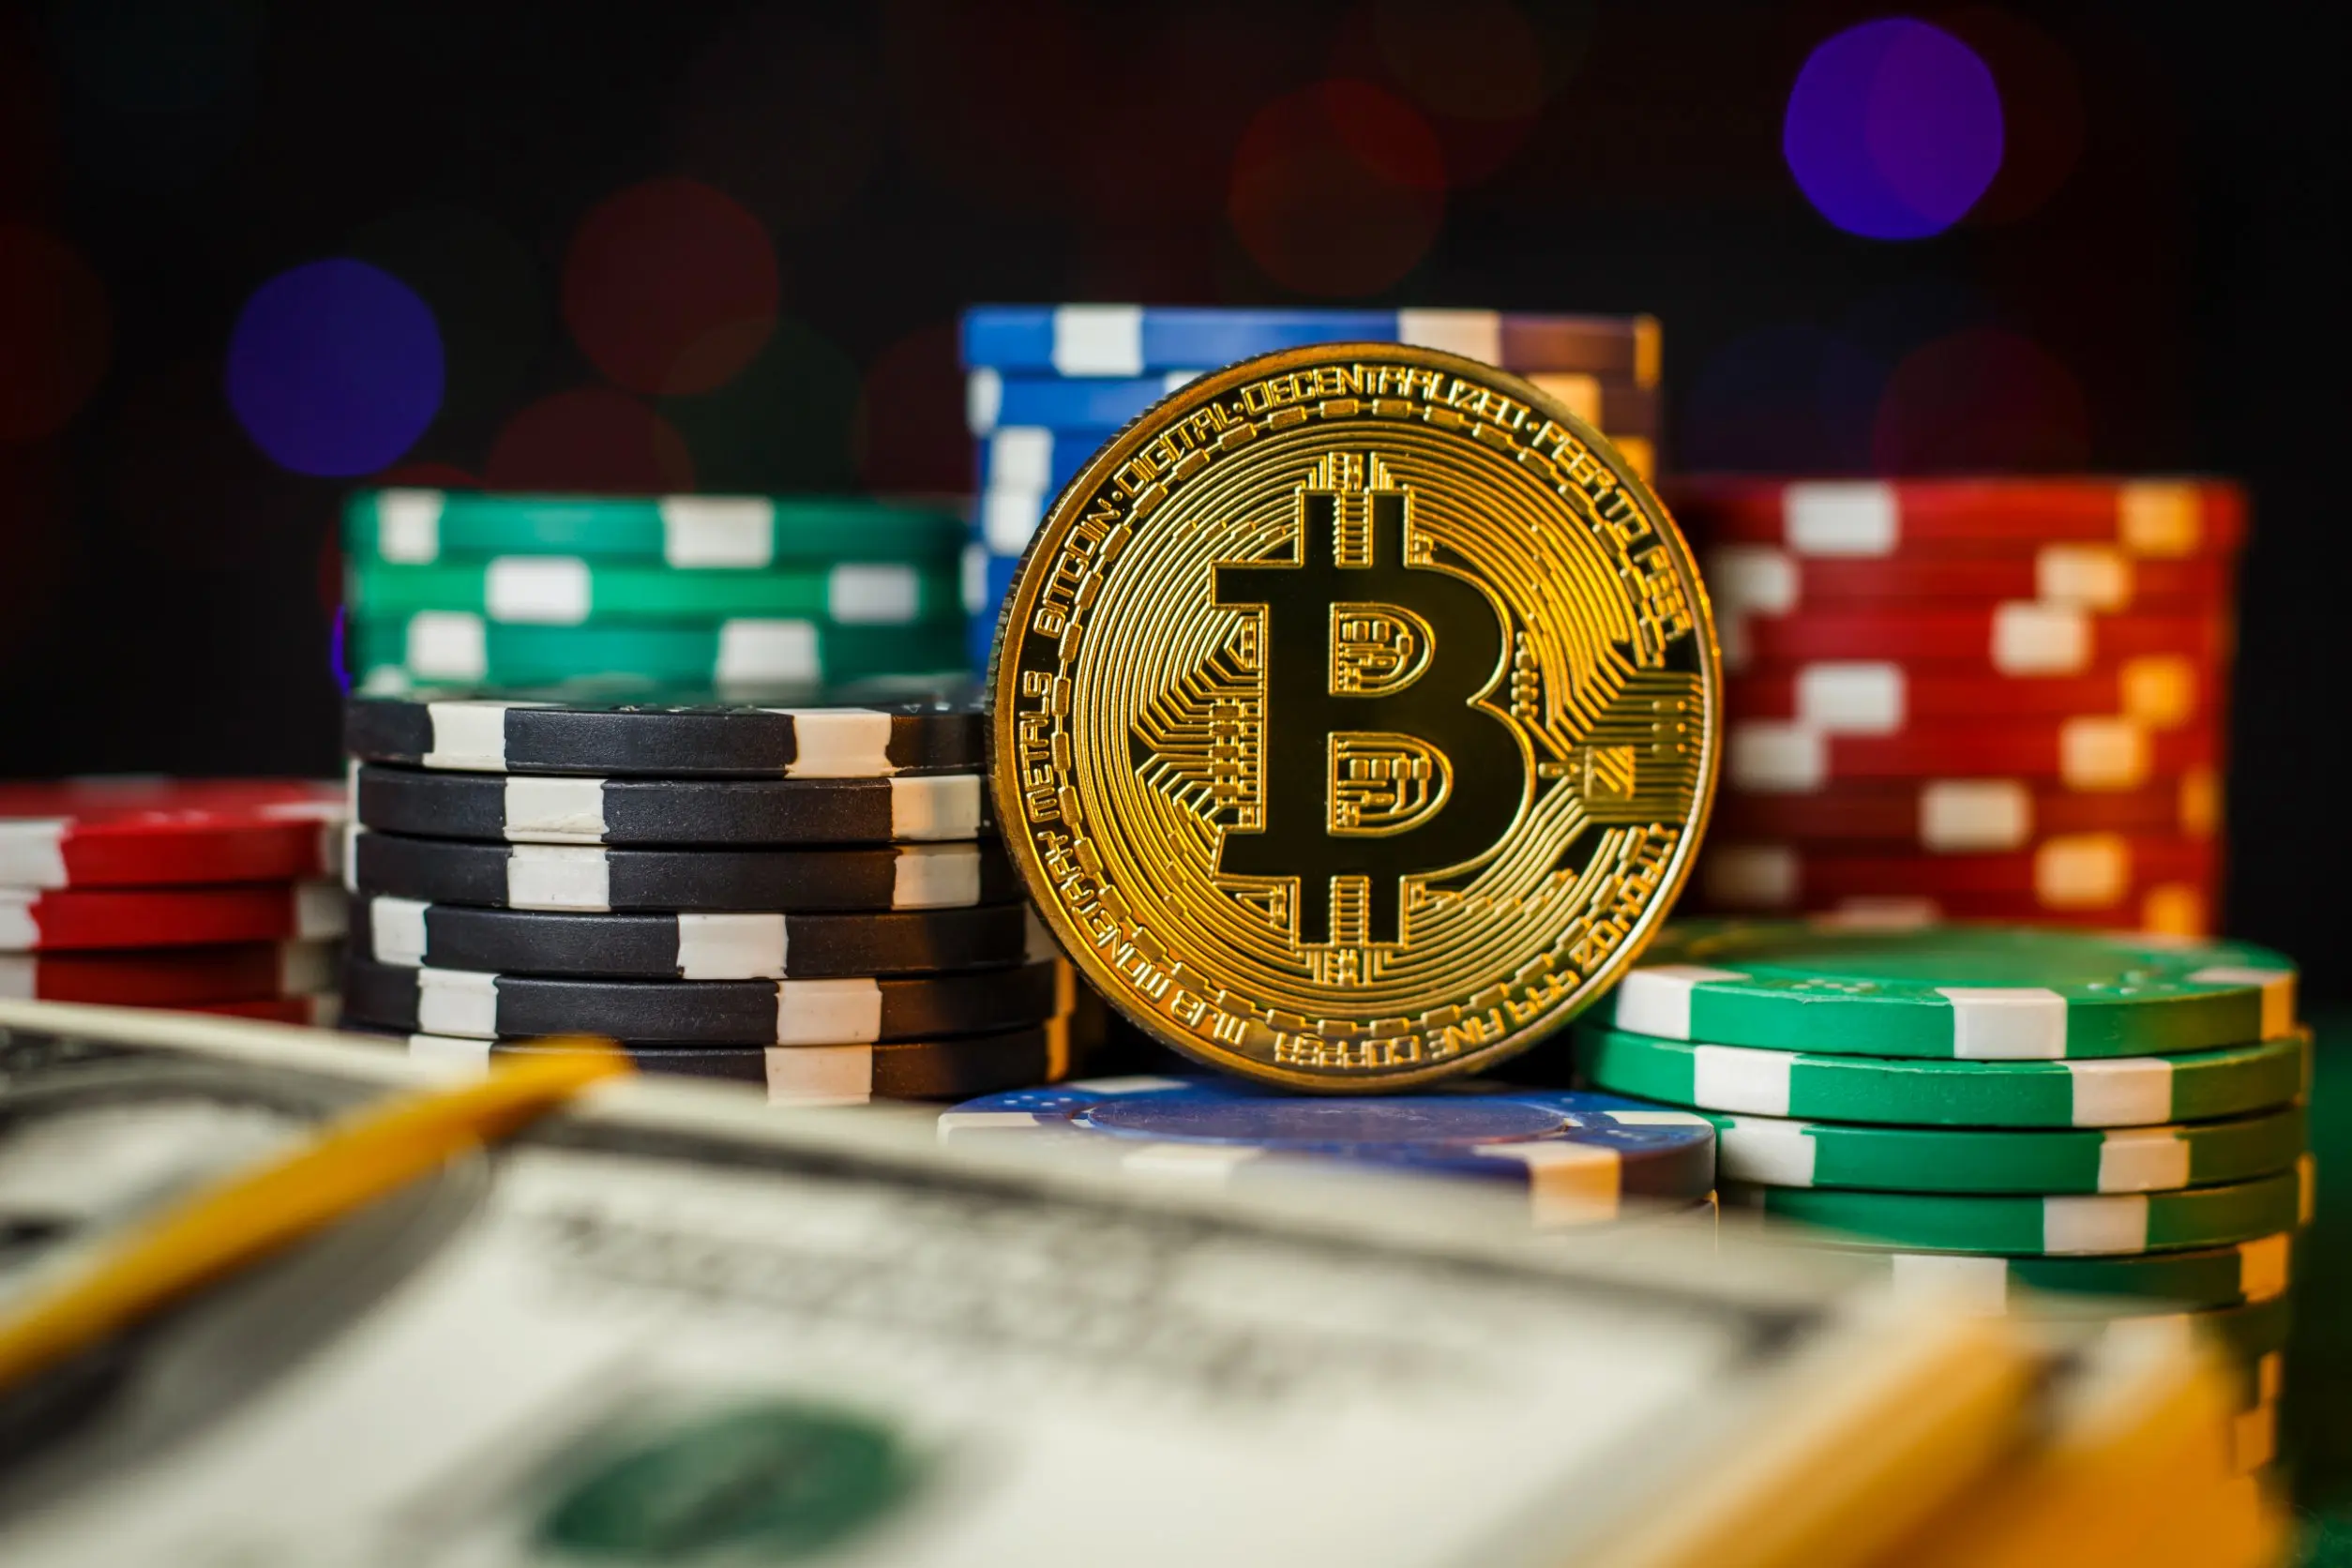 Casinos that accept crypto